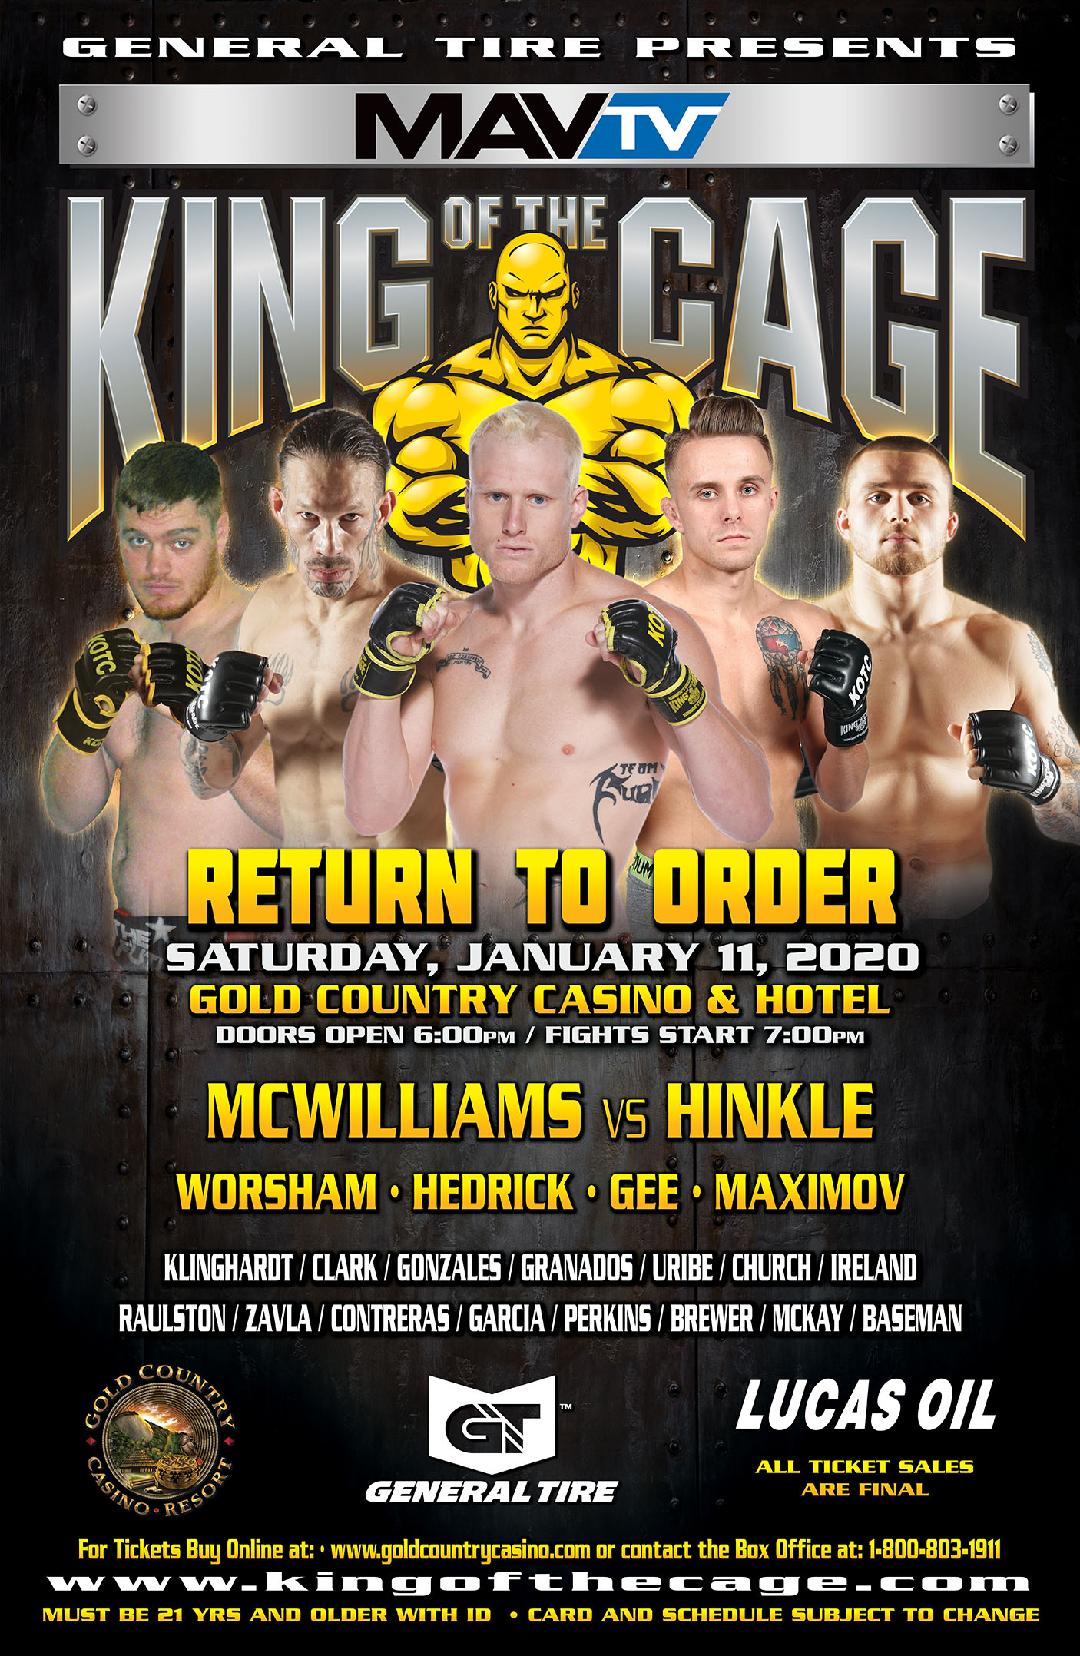 BREAKING: Oroville, California Hosts the First KOTC Event of 2020